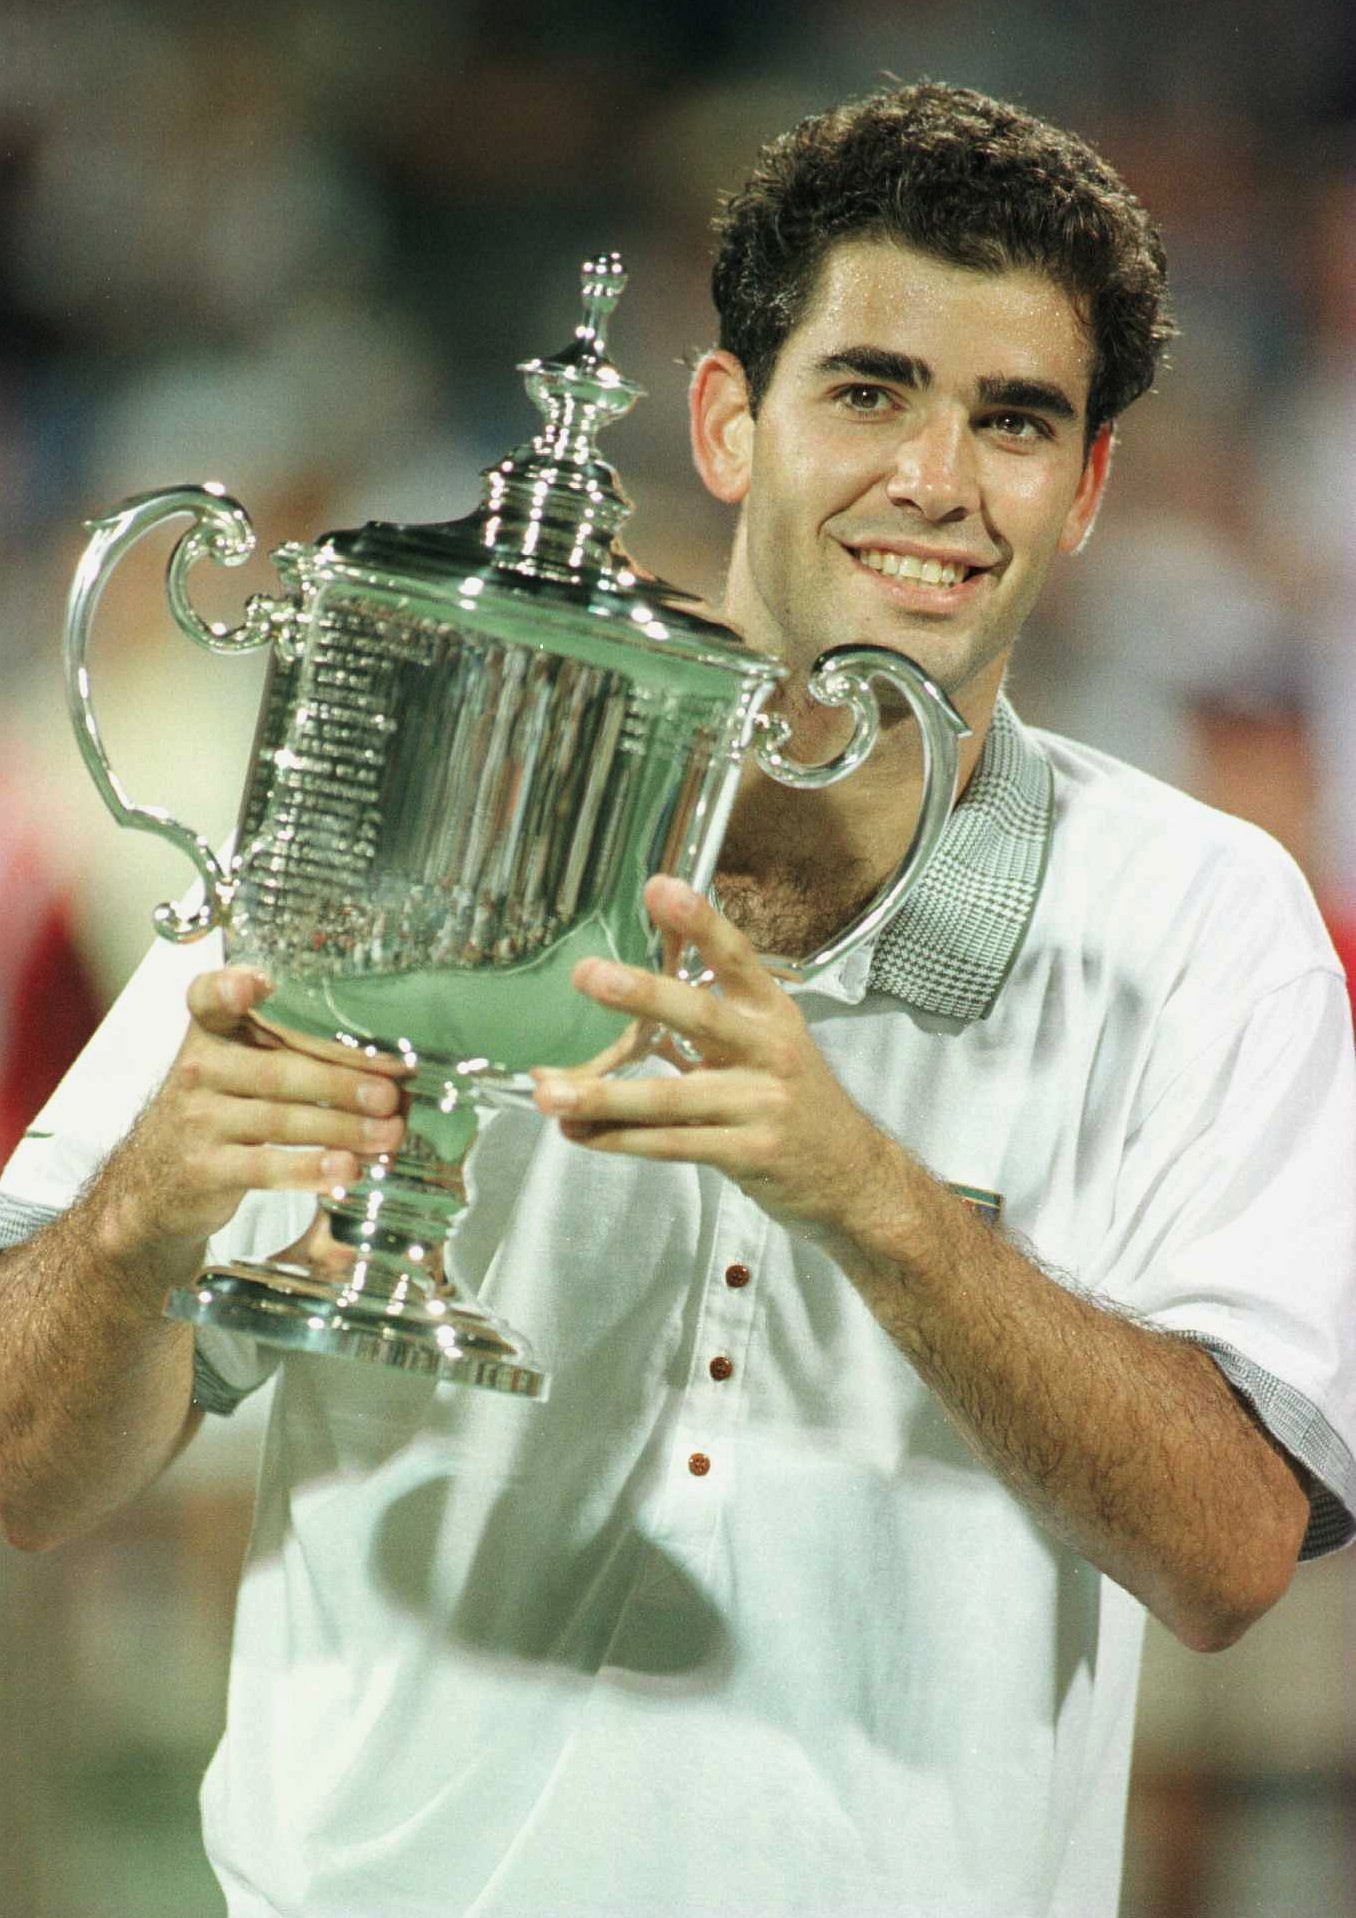 Pete Sampras won his fourth US Open title in 1996.